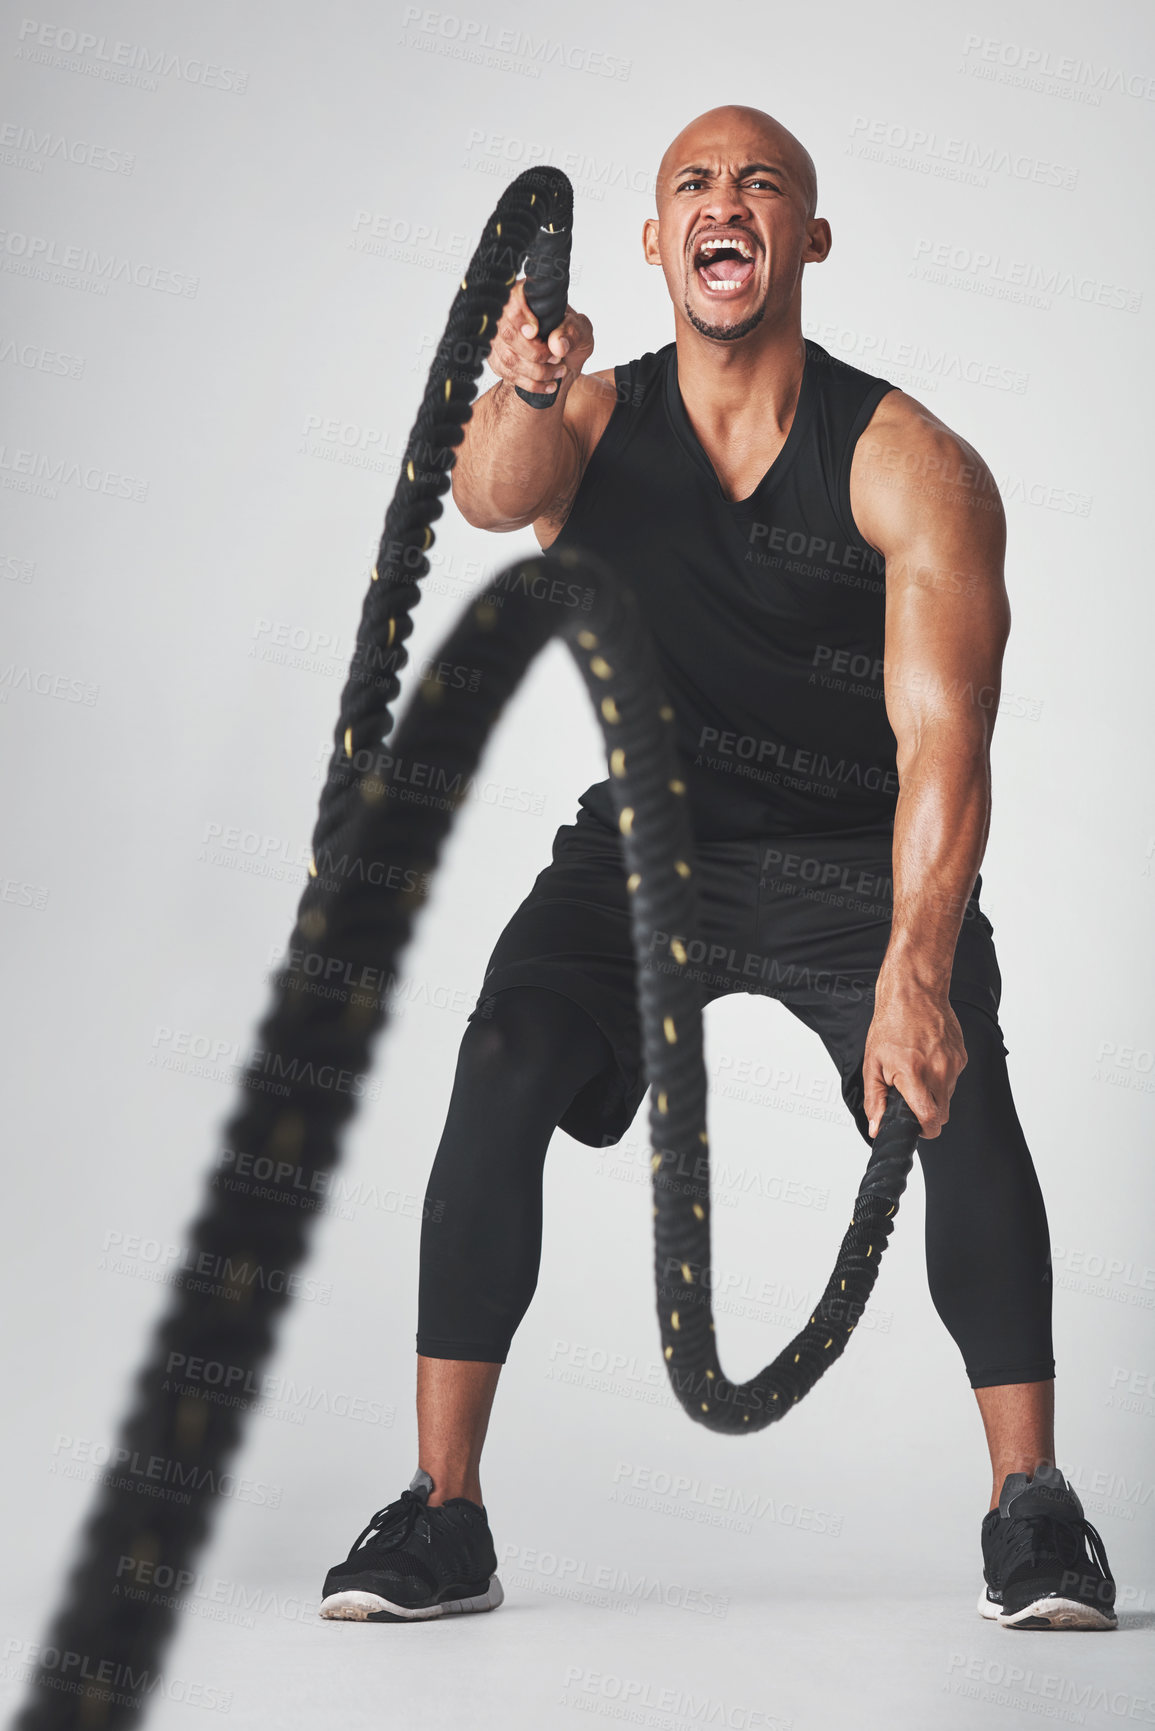 Buy stock photo Studio shot of an athletic young man working out with battle ropes against a grey background